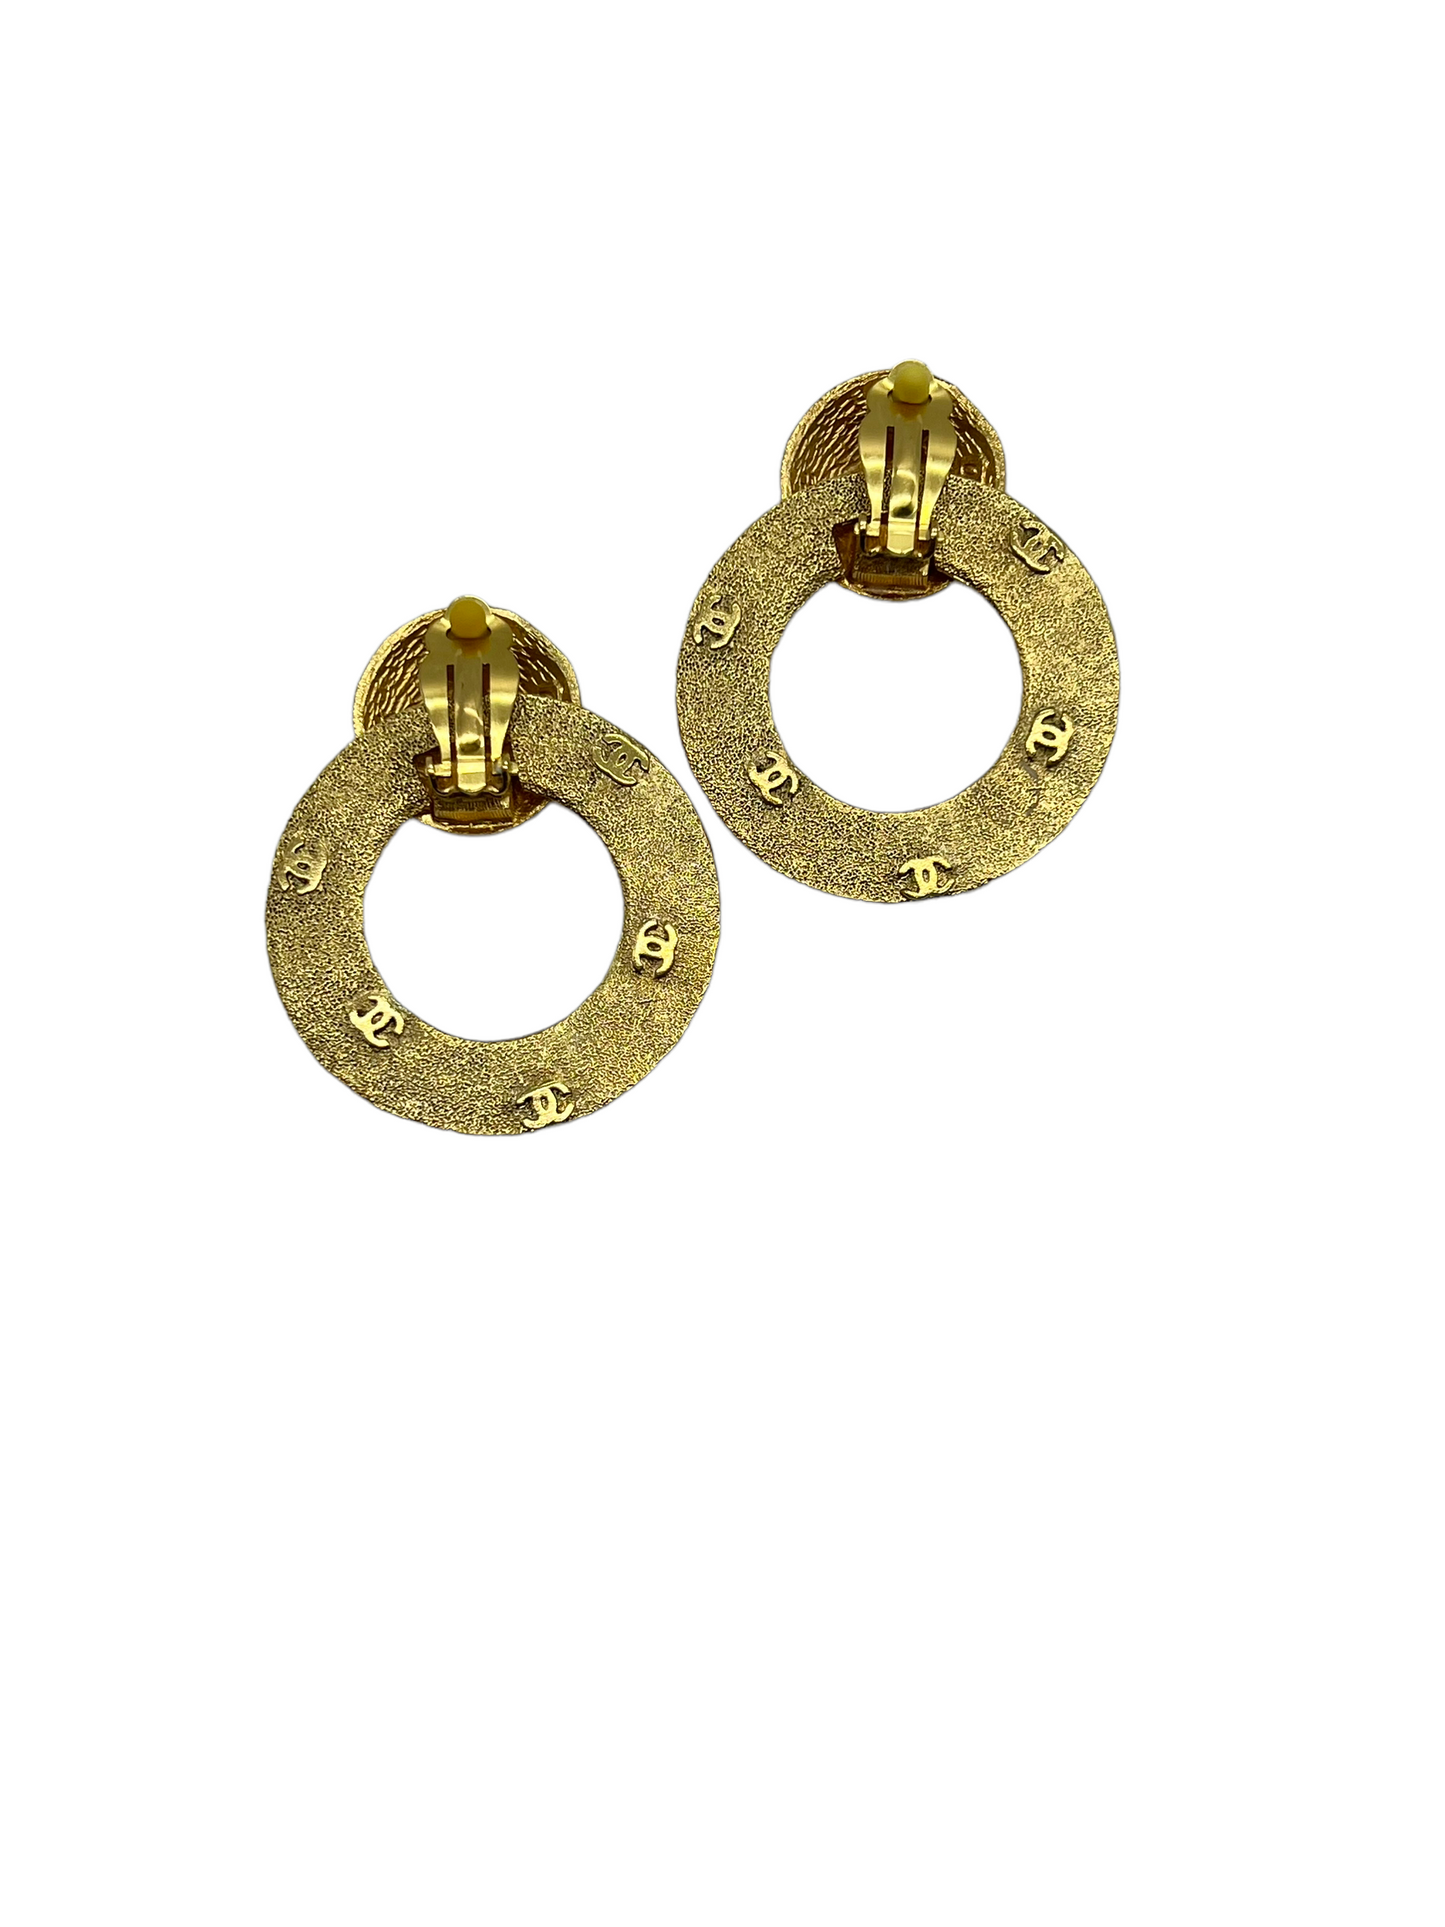 Chanel Vintage Gold Collection 29 2 Way Clip On Earrings